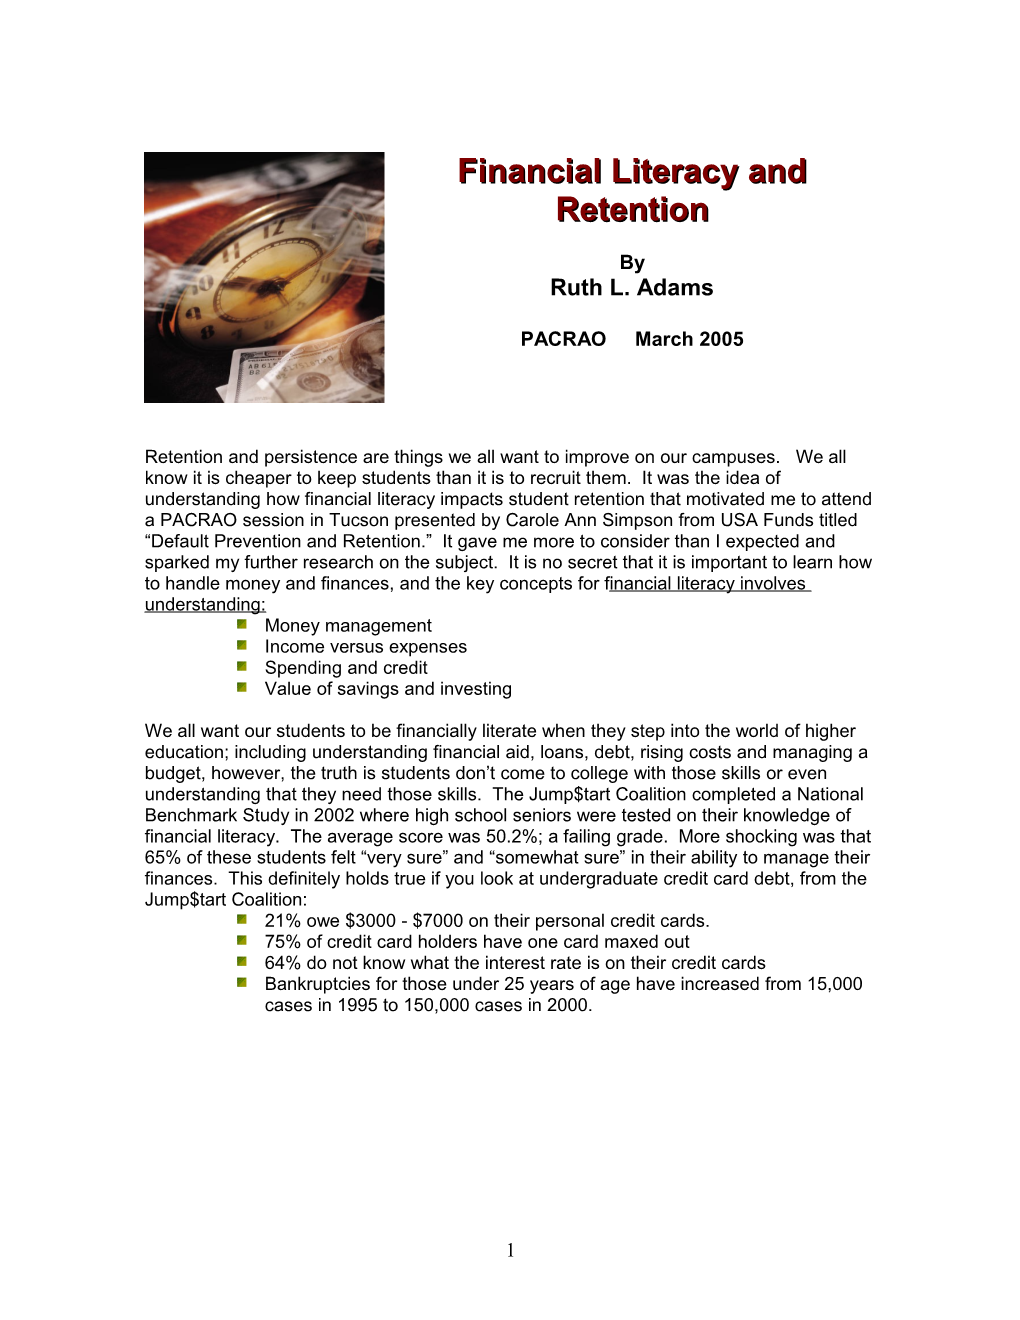 Financial Literacy and Retention